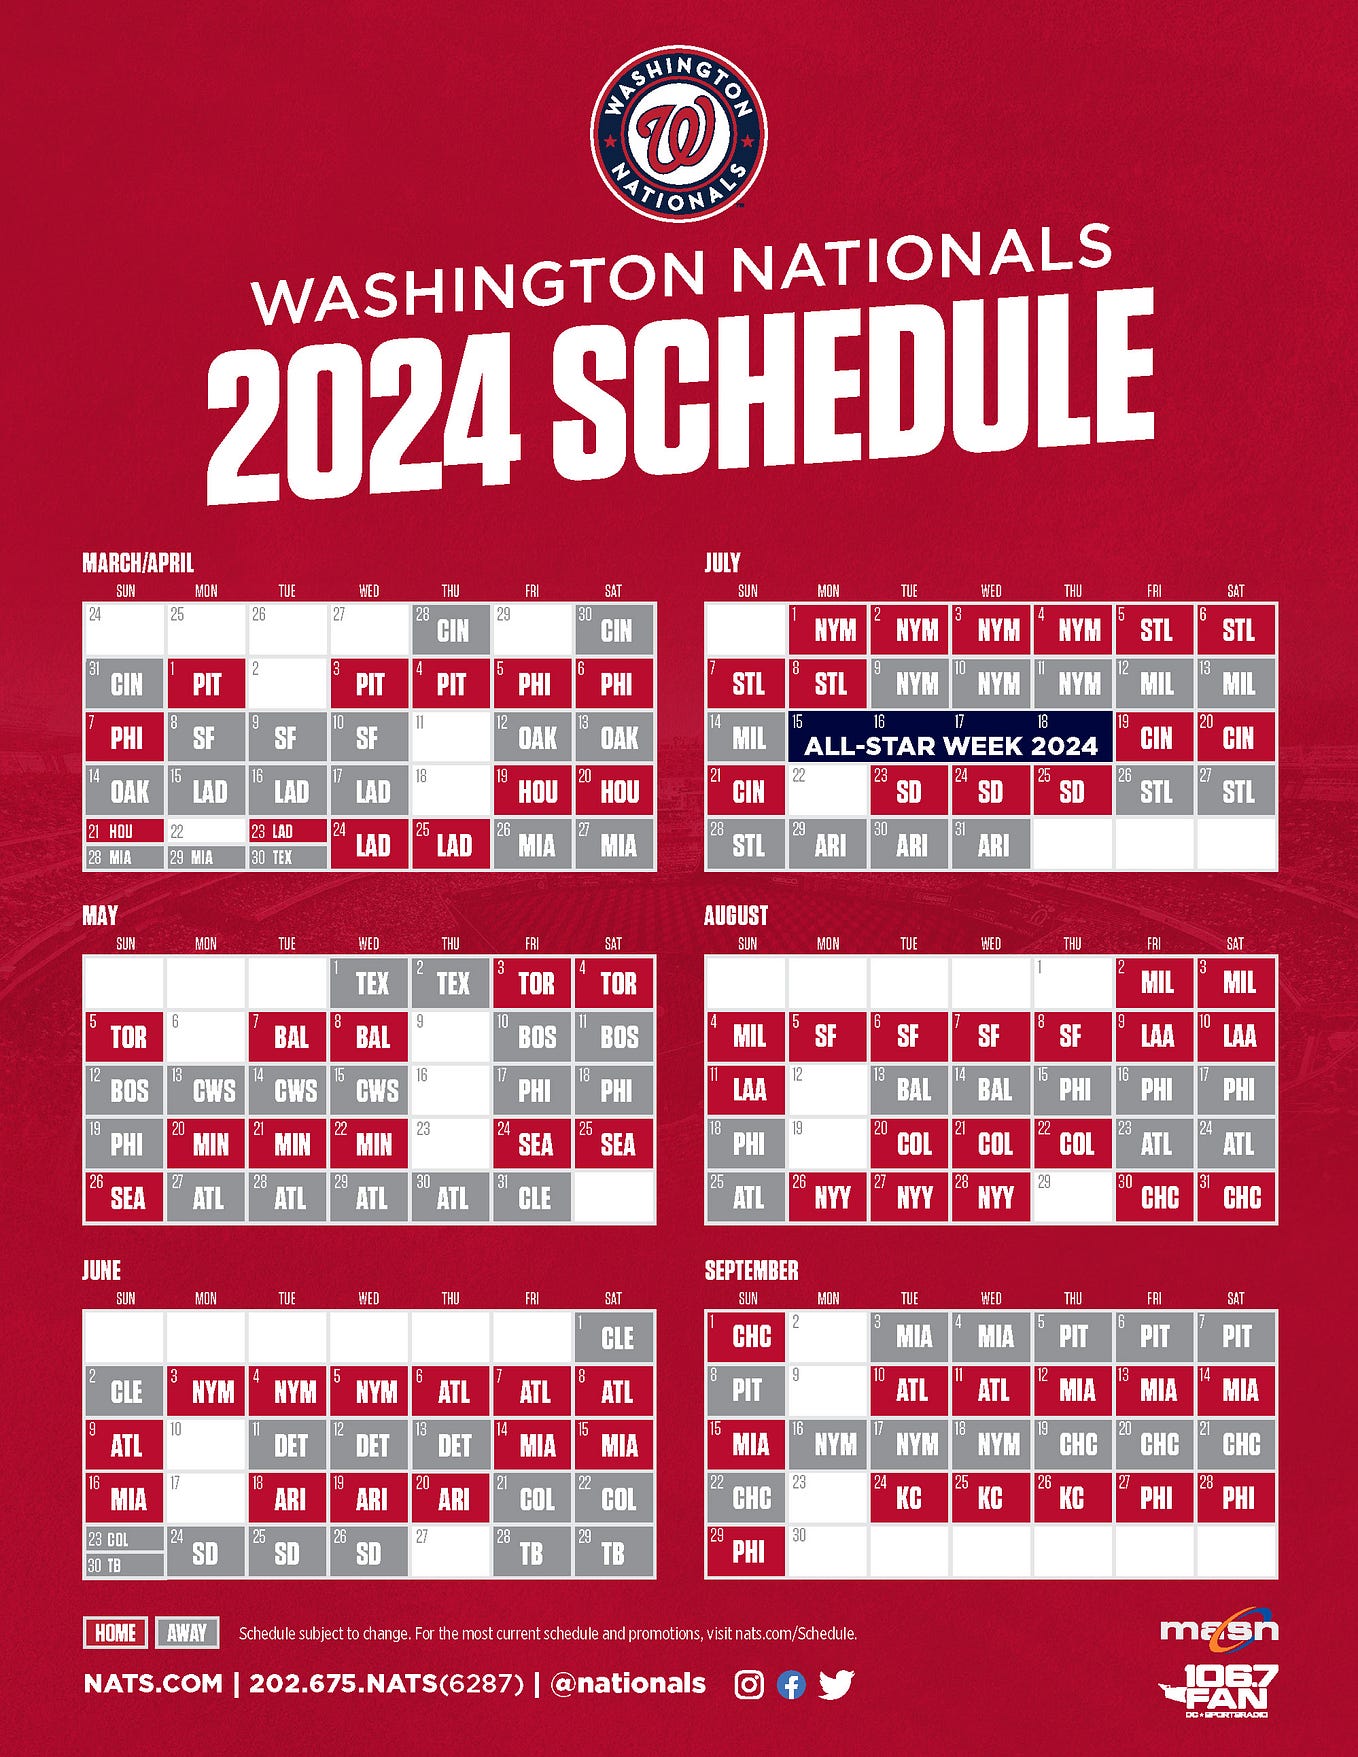 Washington Nationals Announce 2023 Schedule by Nationals